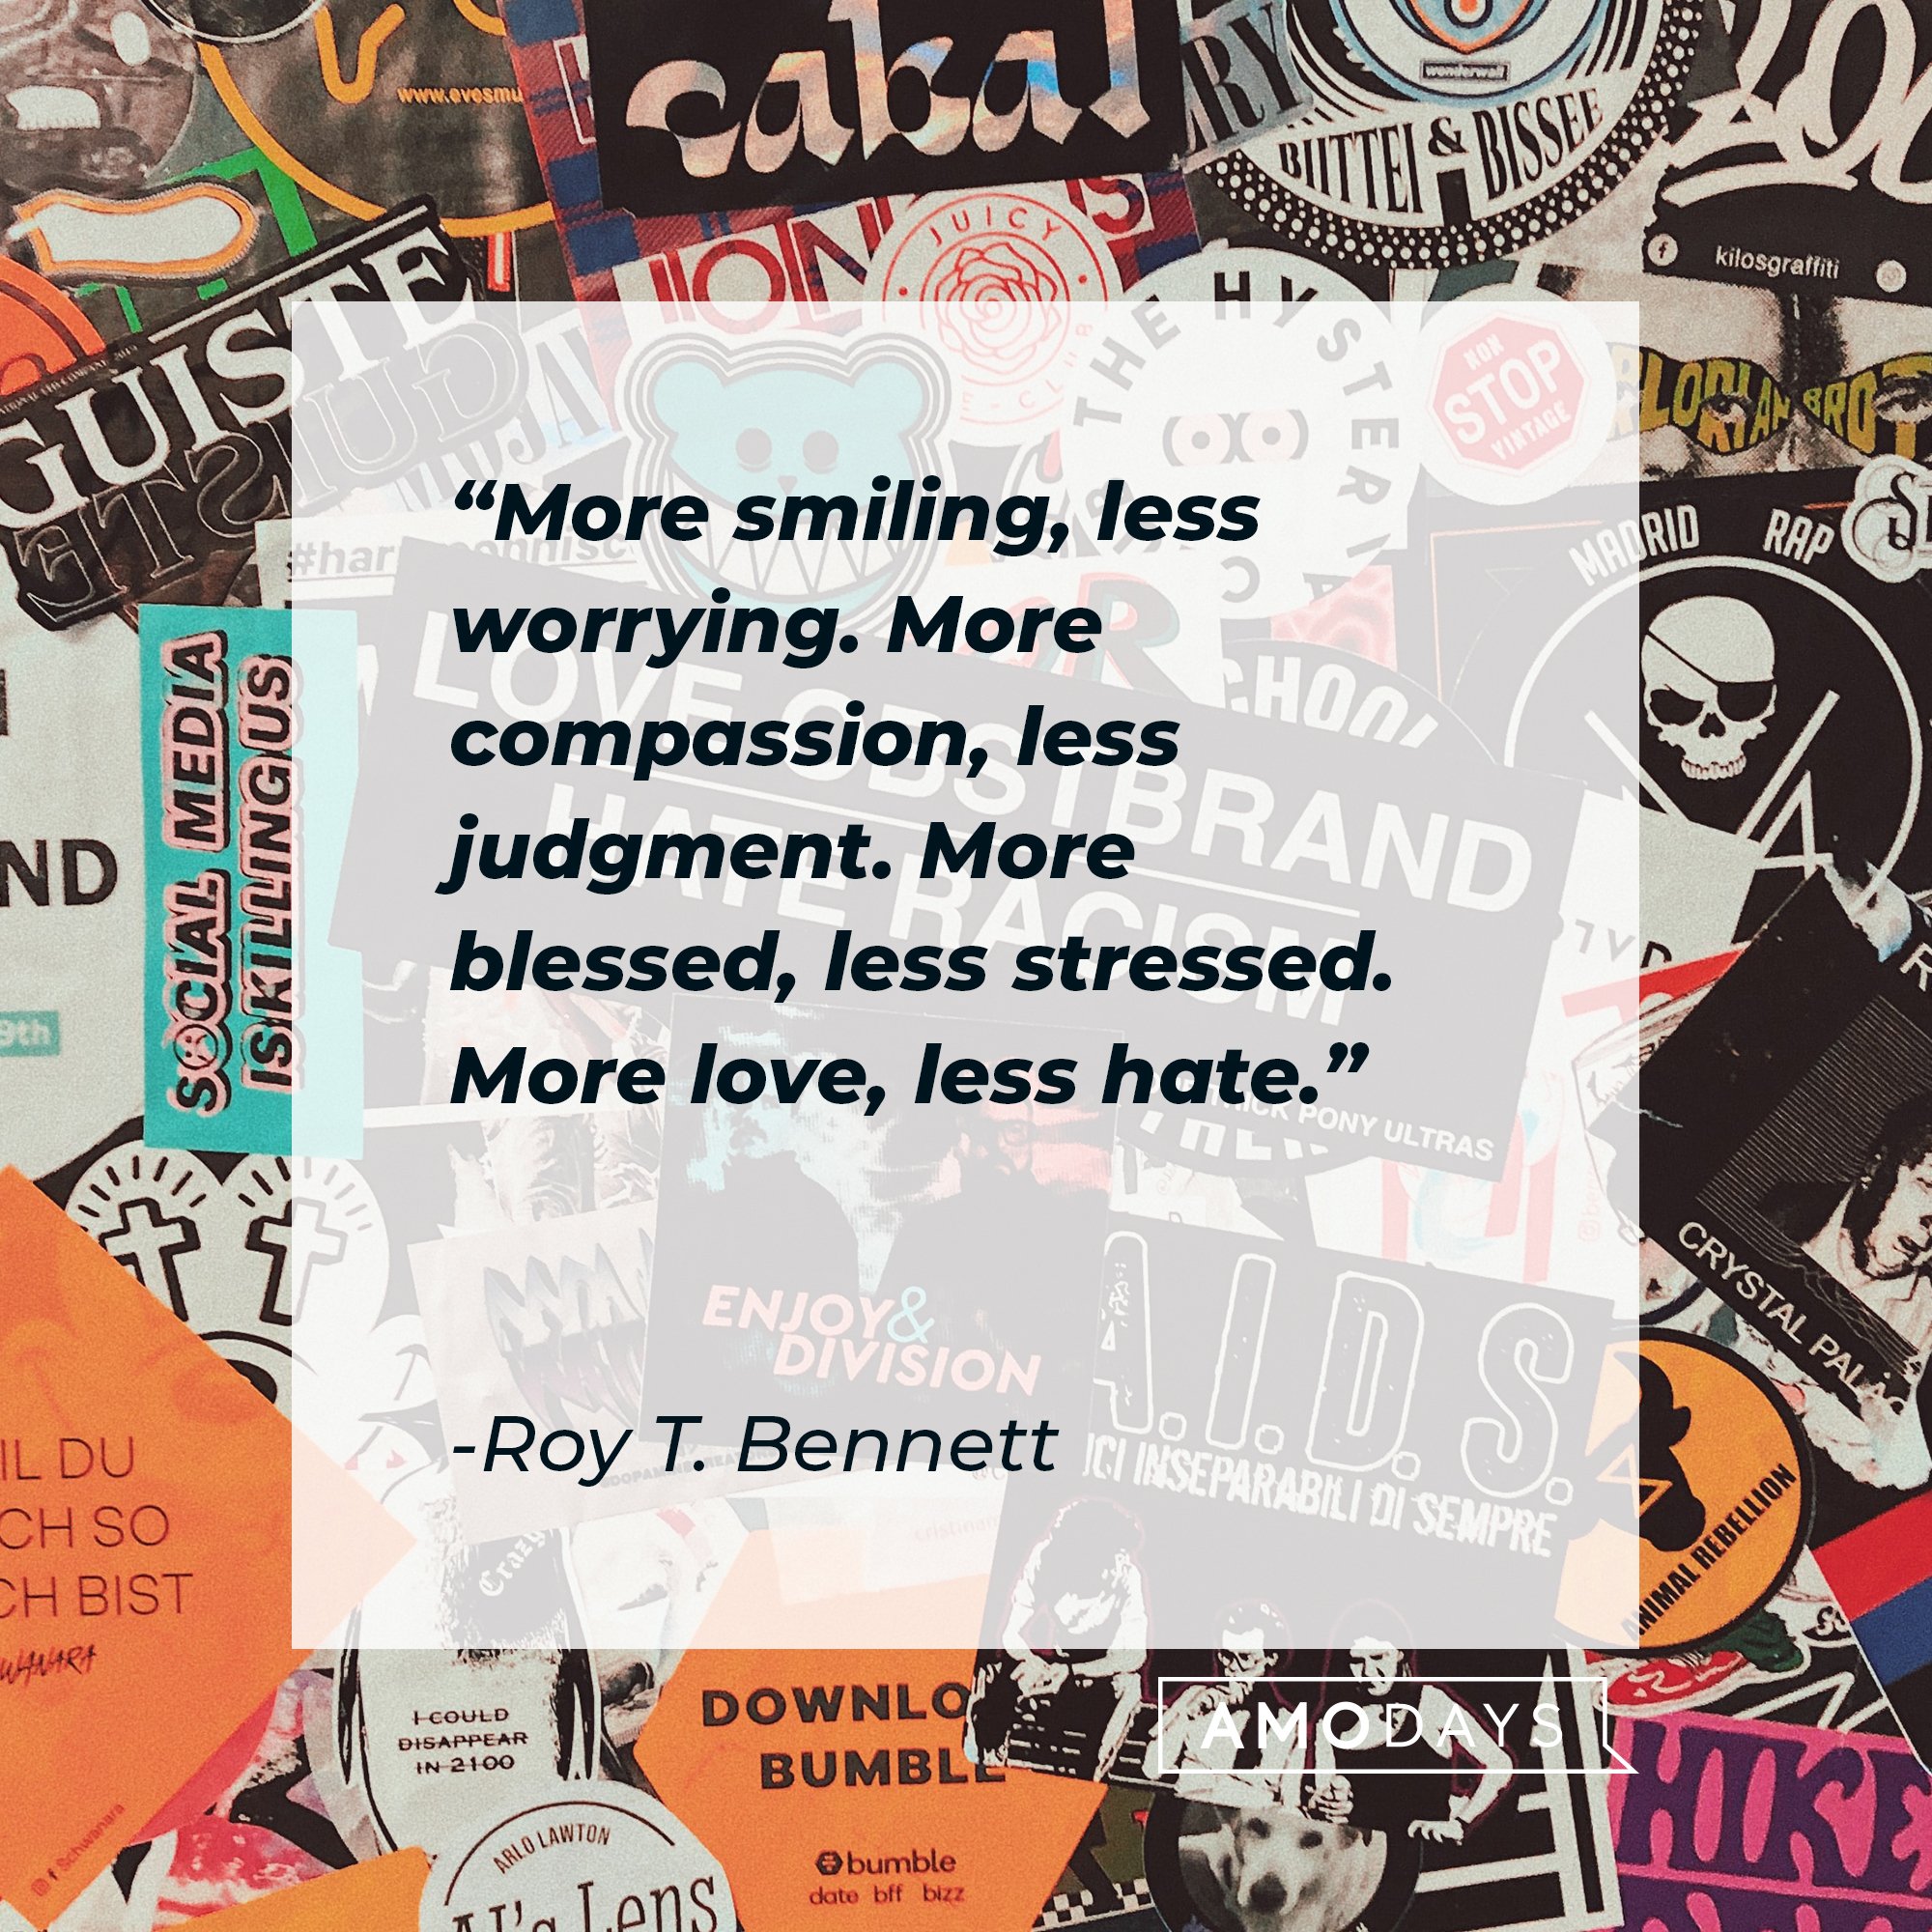 Roy T. Bennett’s quote: "More smiling, less worrying. More compassion, less judgment. More blessed, less stressed. More love, less hate." | Image: AmoDays  